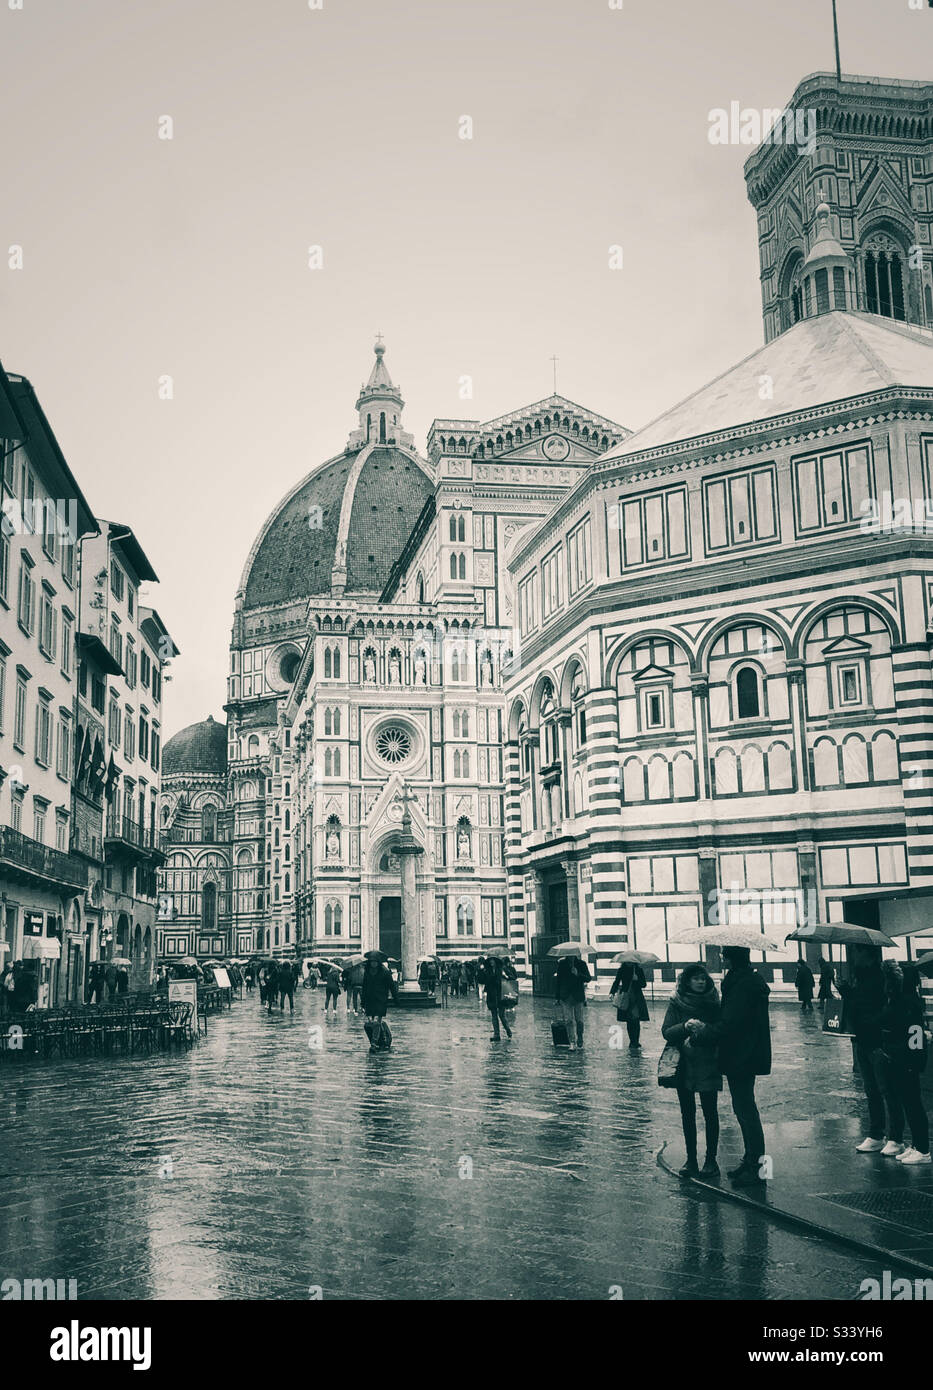 A Rainy Day In Florence